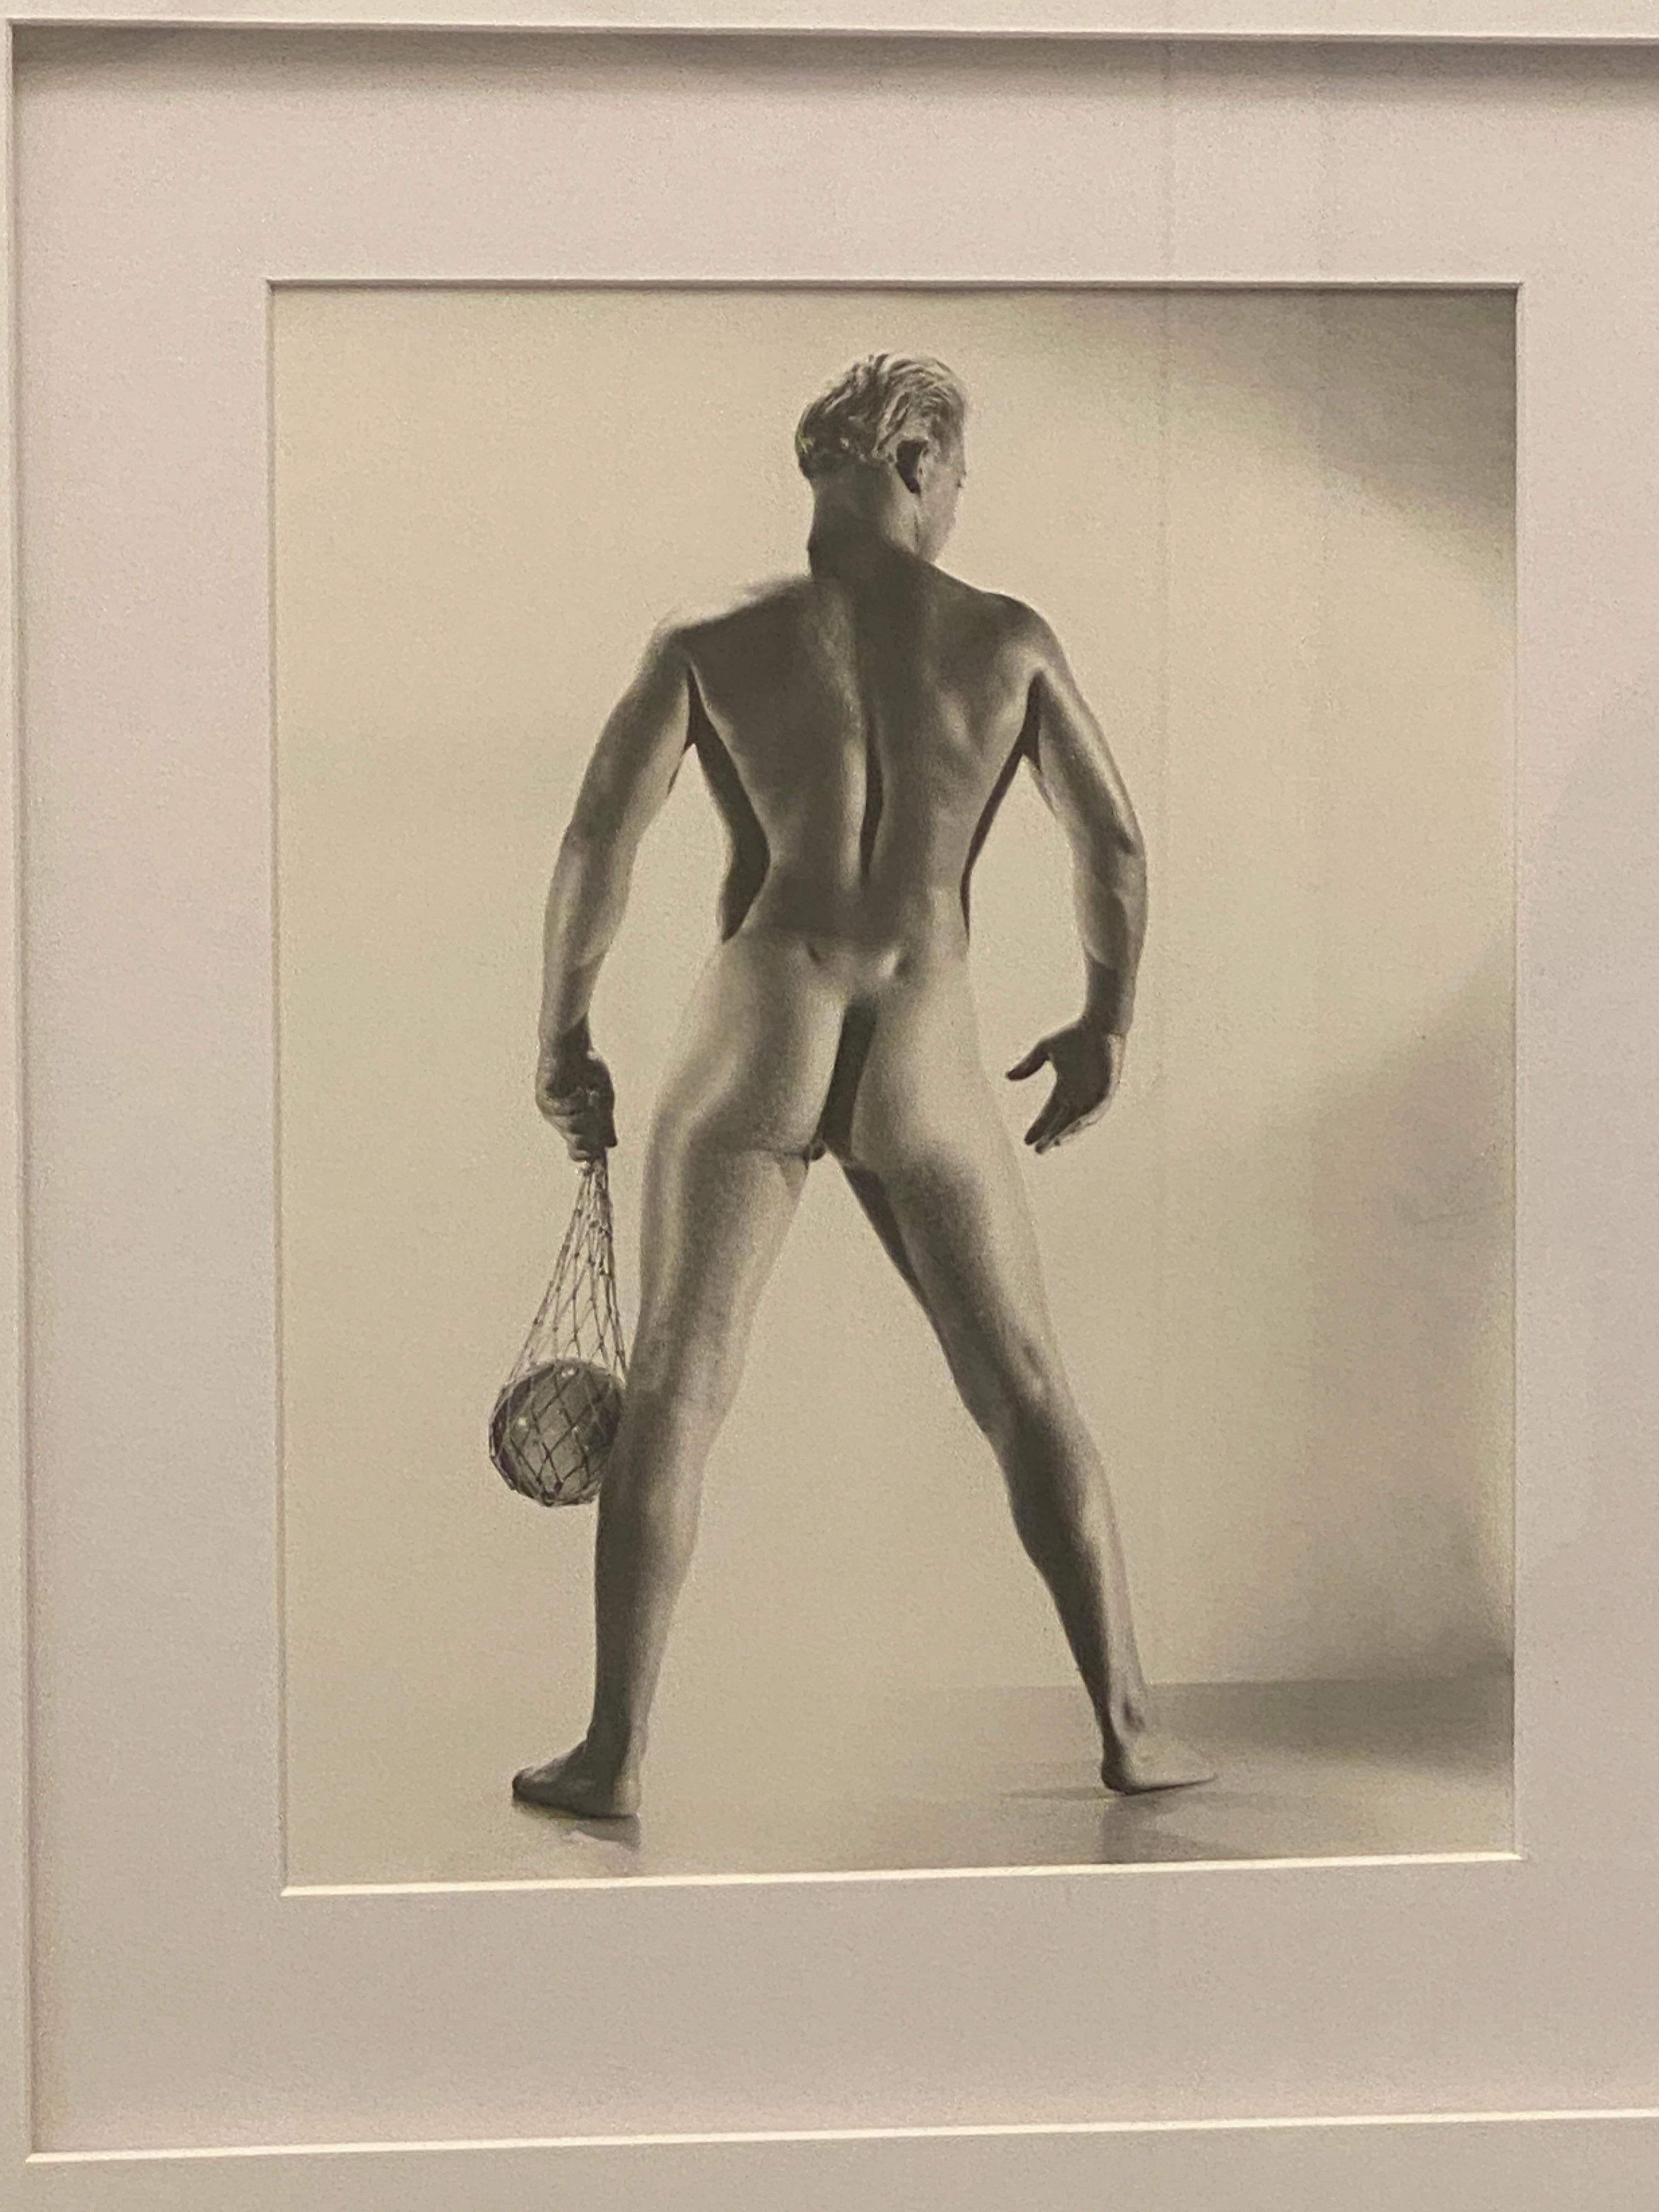 Mid-Century Modern Bruce of L.A. (Bruce Bellas) Original 50s Male Nude Photograph Handsome Model For Sale